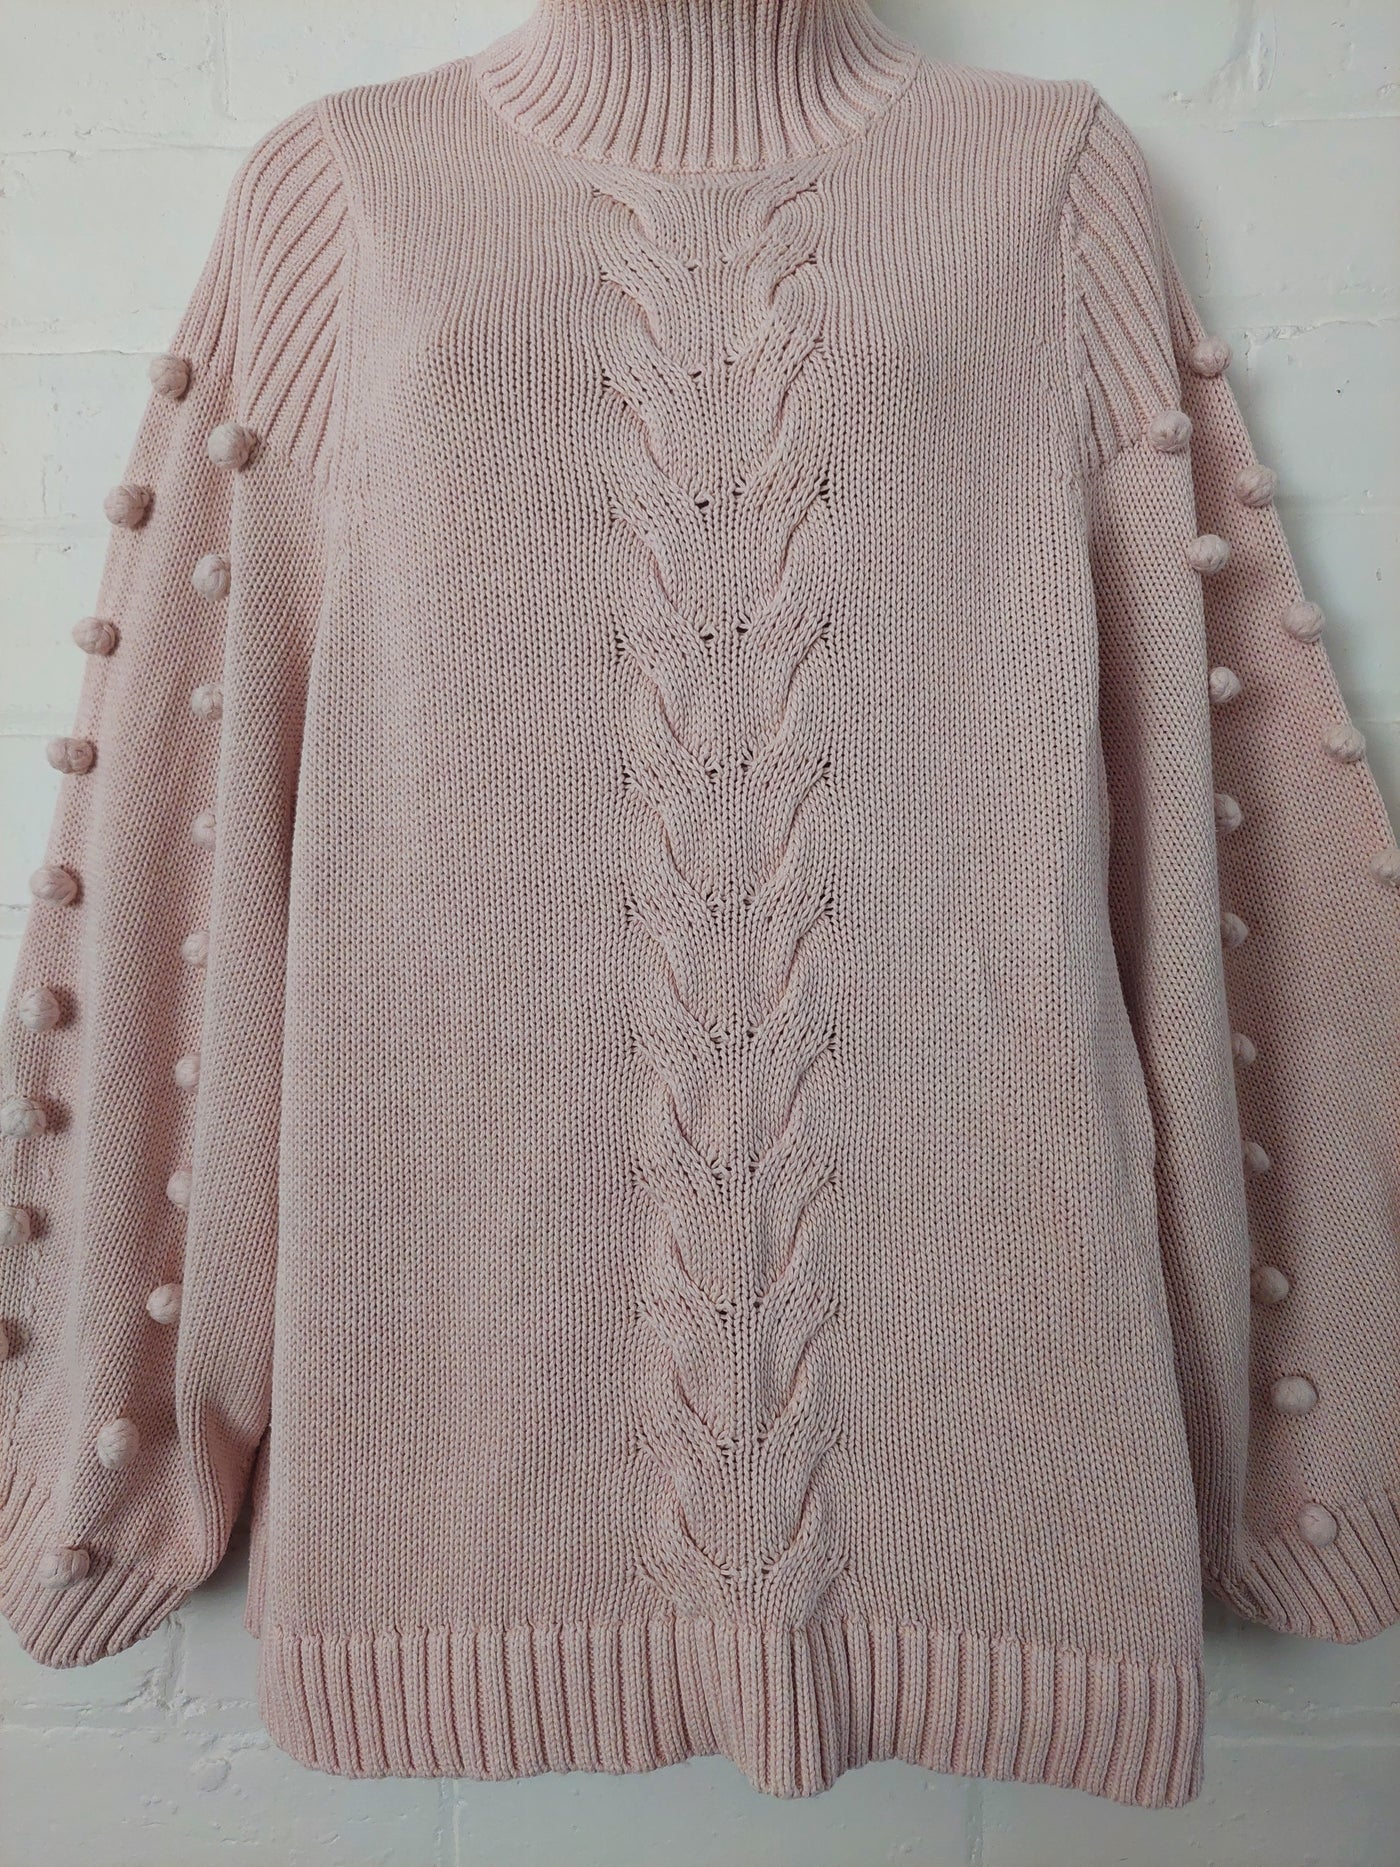 JOSLIN Katie Cotton Cashmere Knit, Size S. Relaxed fit. RRP $379